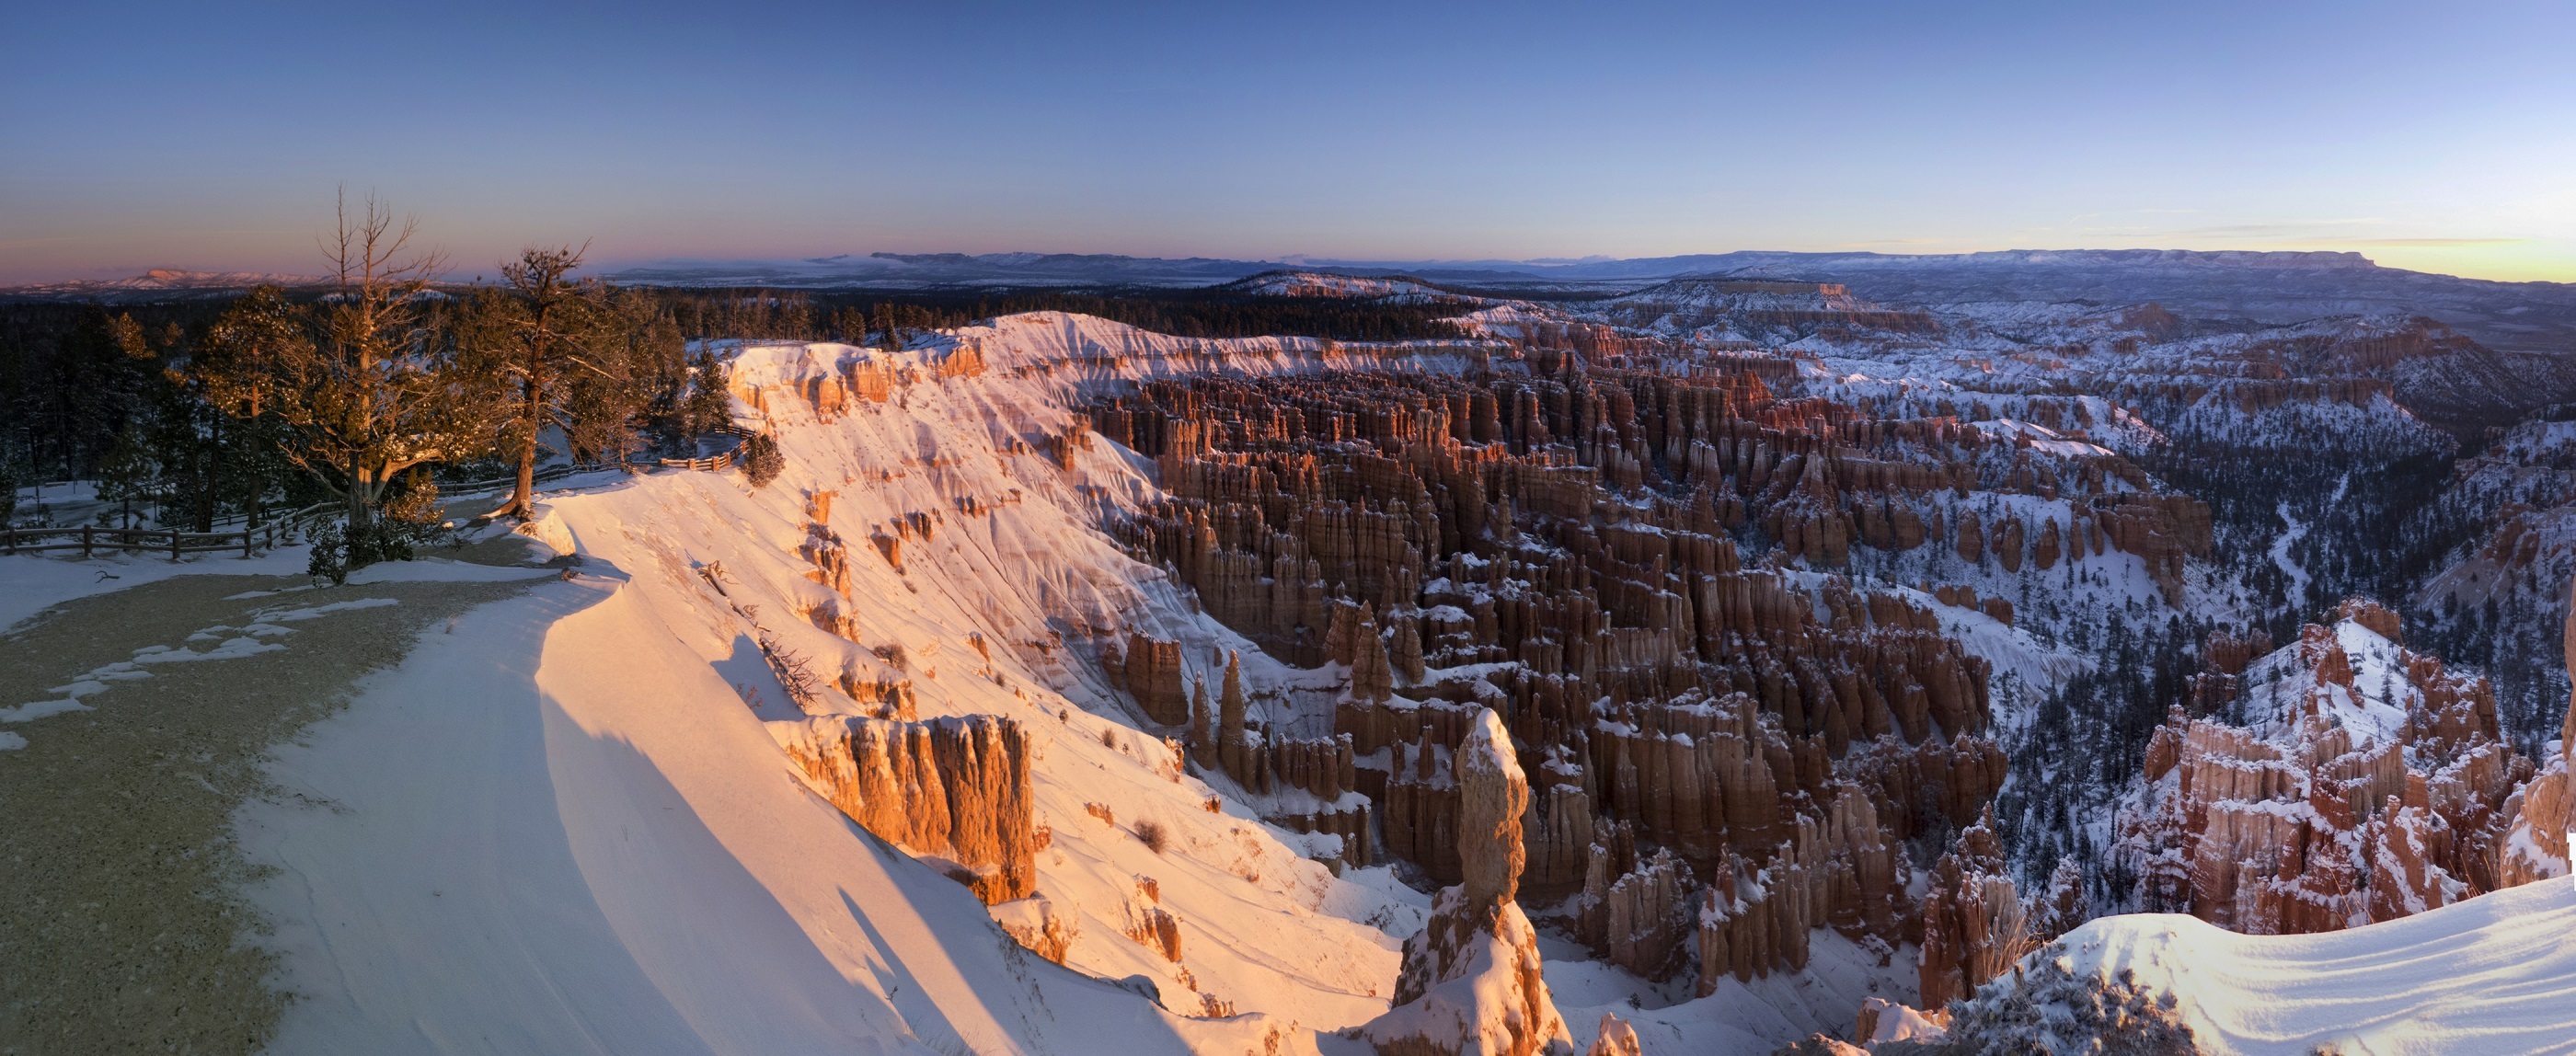 earth, bryce canyon national park, canyon, cliff, landscape, nature, usa, utah, winter, national park download HD wallpaper